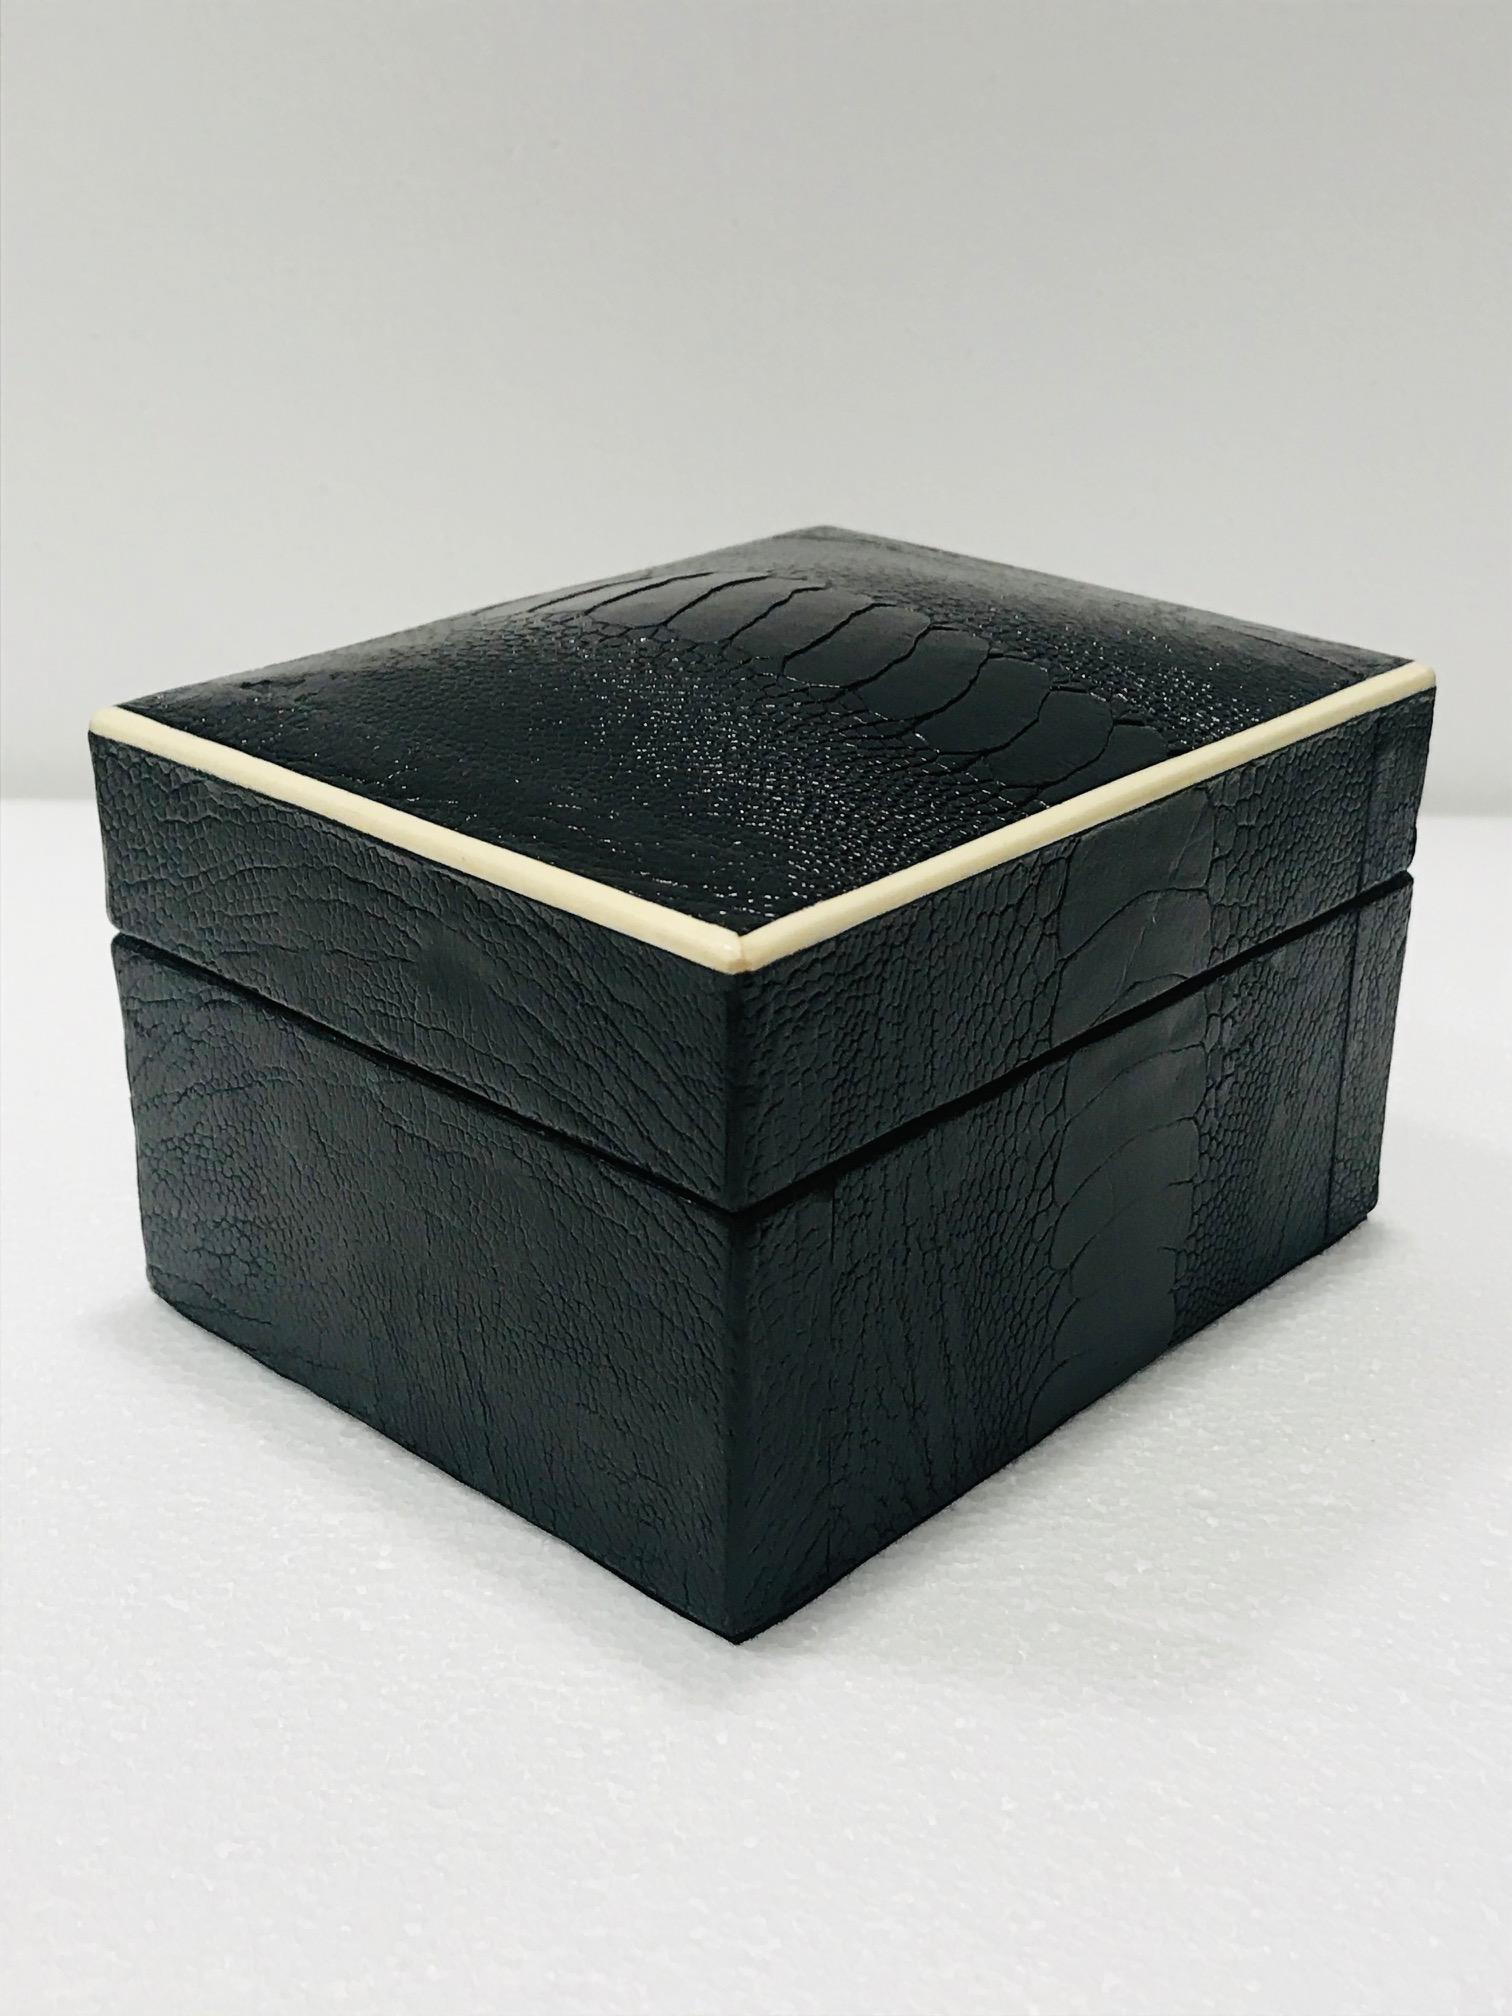 Organic modern decorative box wrapped in exotic ostrich leather with bone inlay detail. All handcrafted in hand-dyed black leather with palmwood interior. Great desk or coffee table accessory. Signed R&Y Augousti on the underside. Box also available